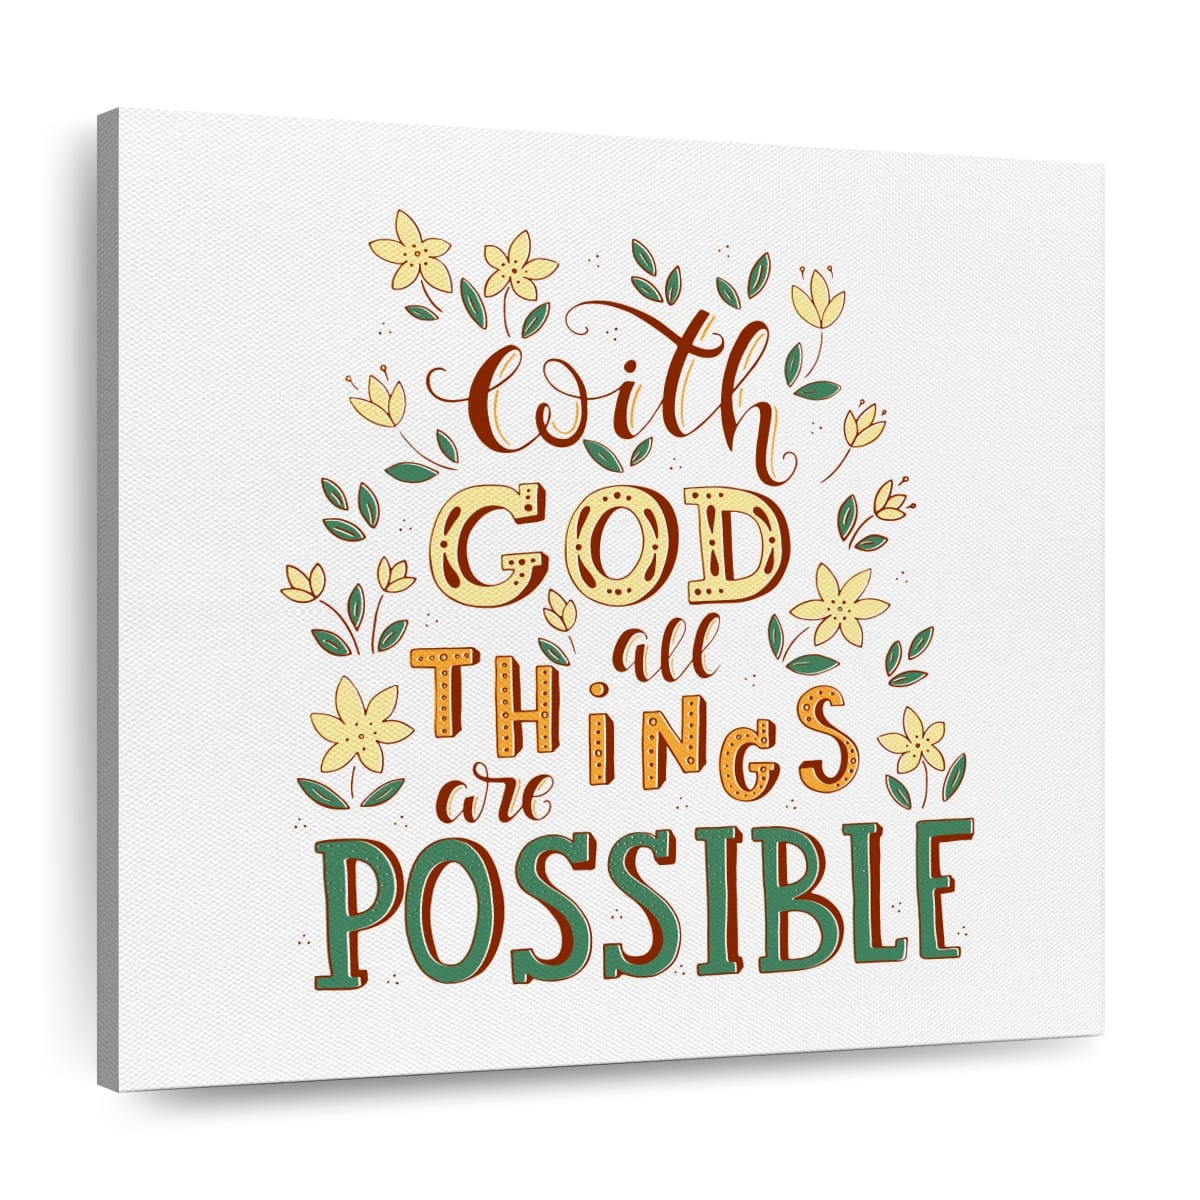 God Makes All Possible Typography Square Canvas Wall Art - Christian Wall Decor - Christian Wall Hanging